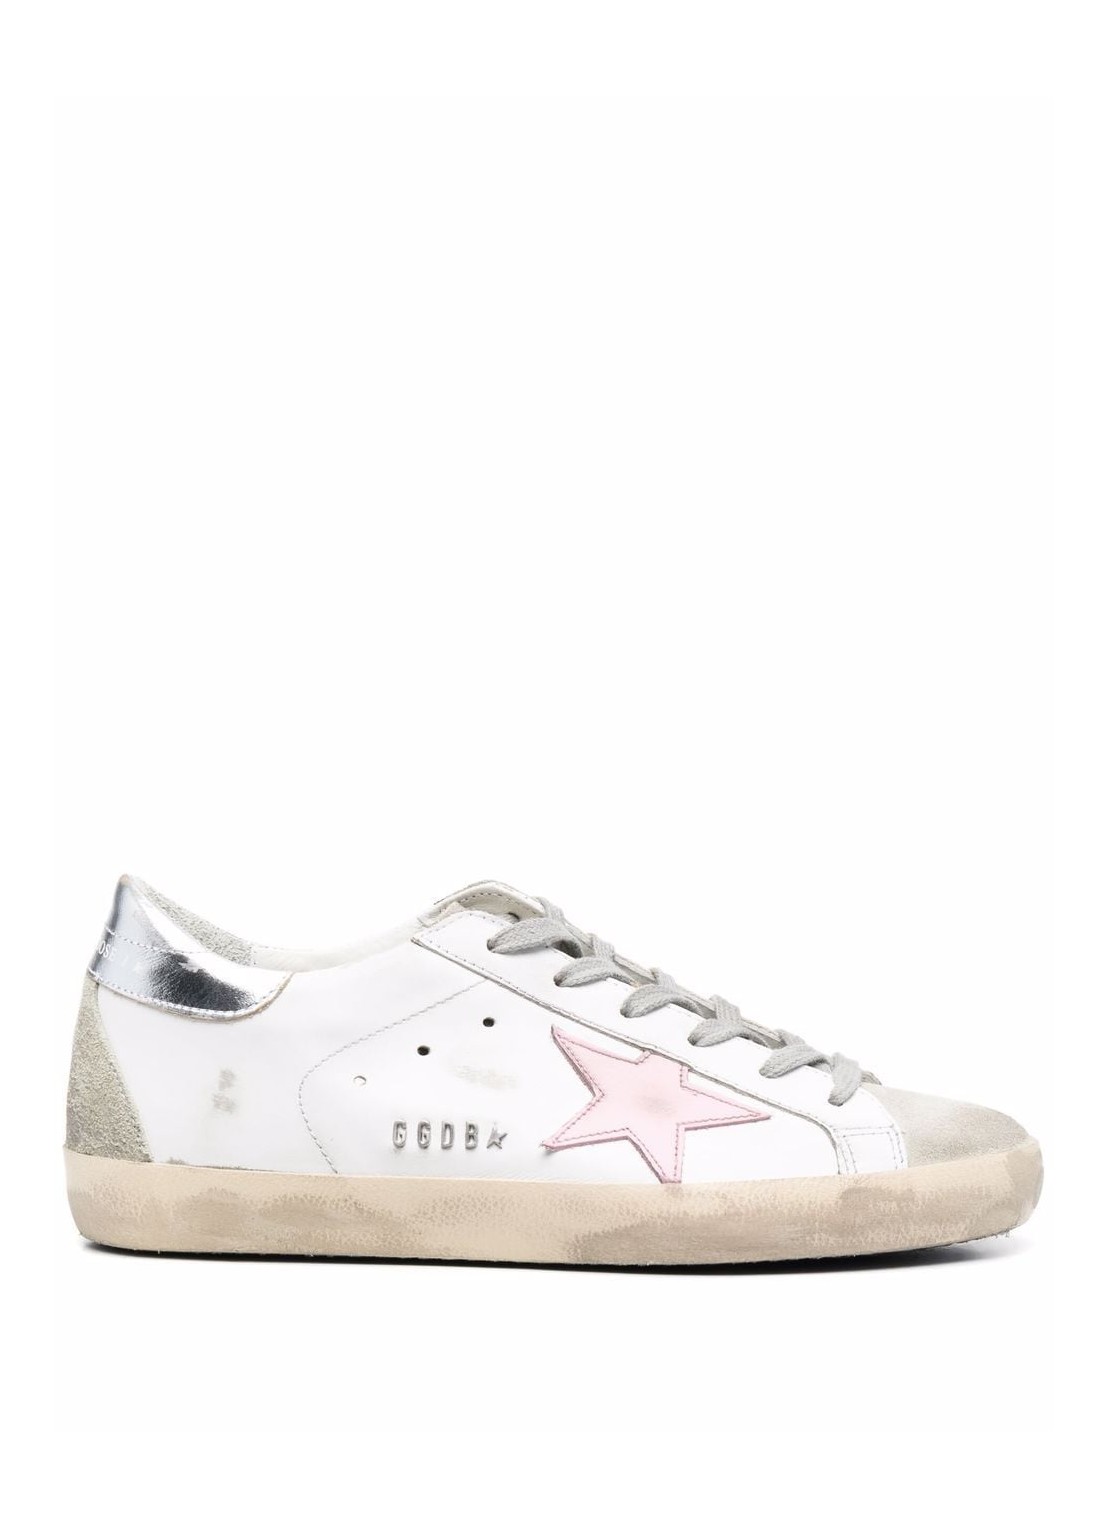 Sneaker golden goose sneaker woman super-star leather upper and star gwf00102f002435 81482 talla 39
